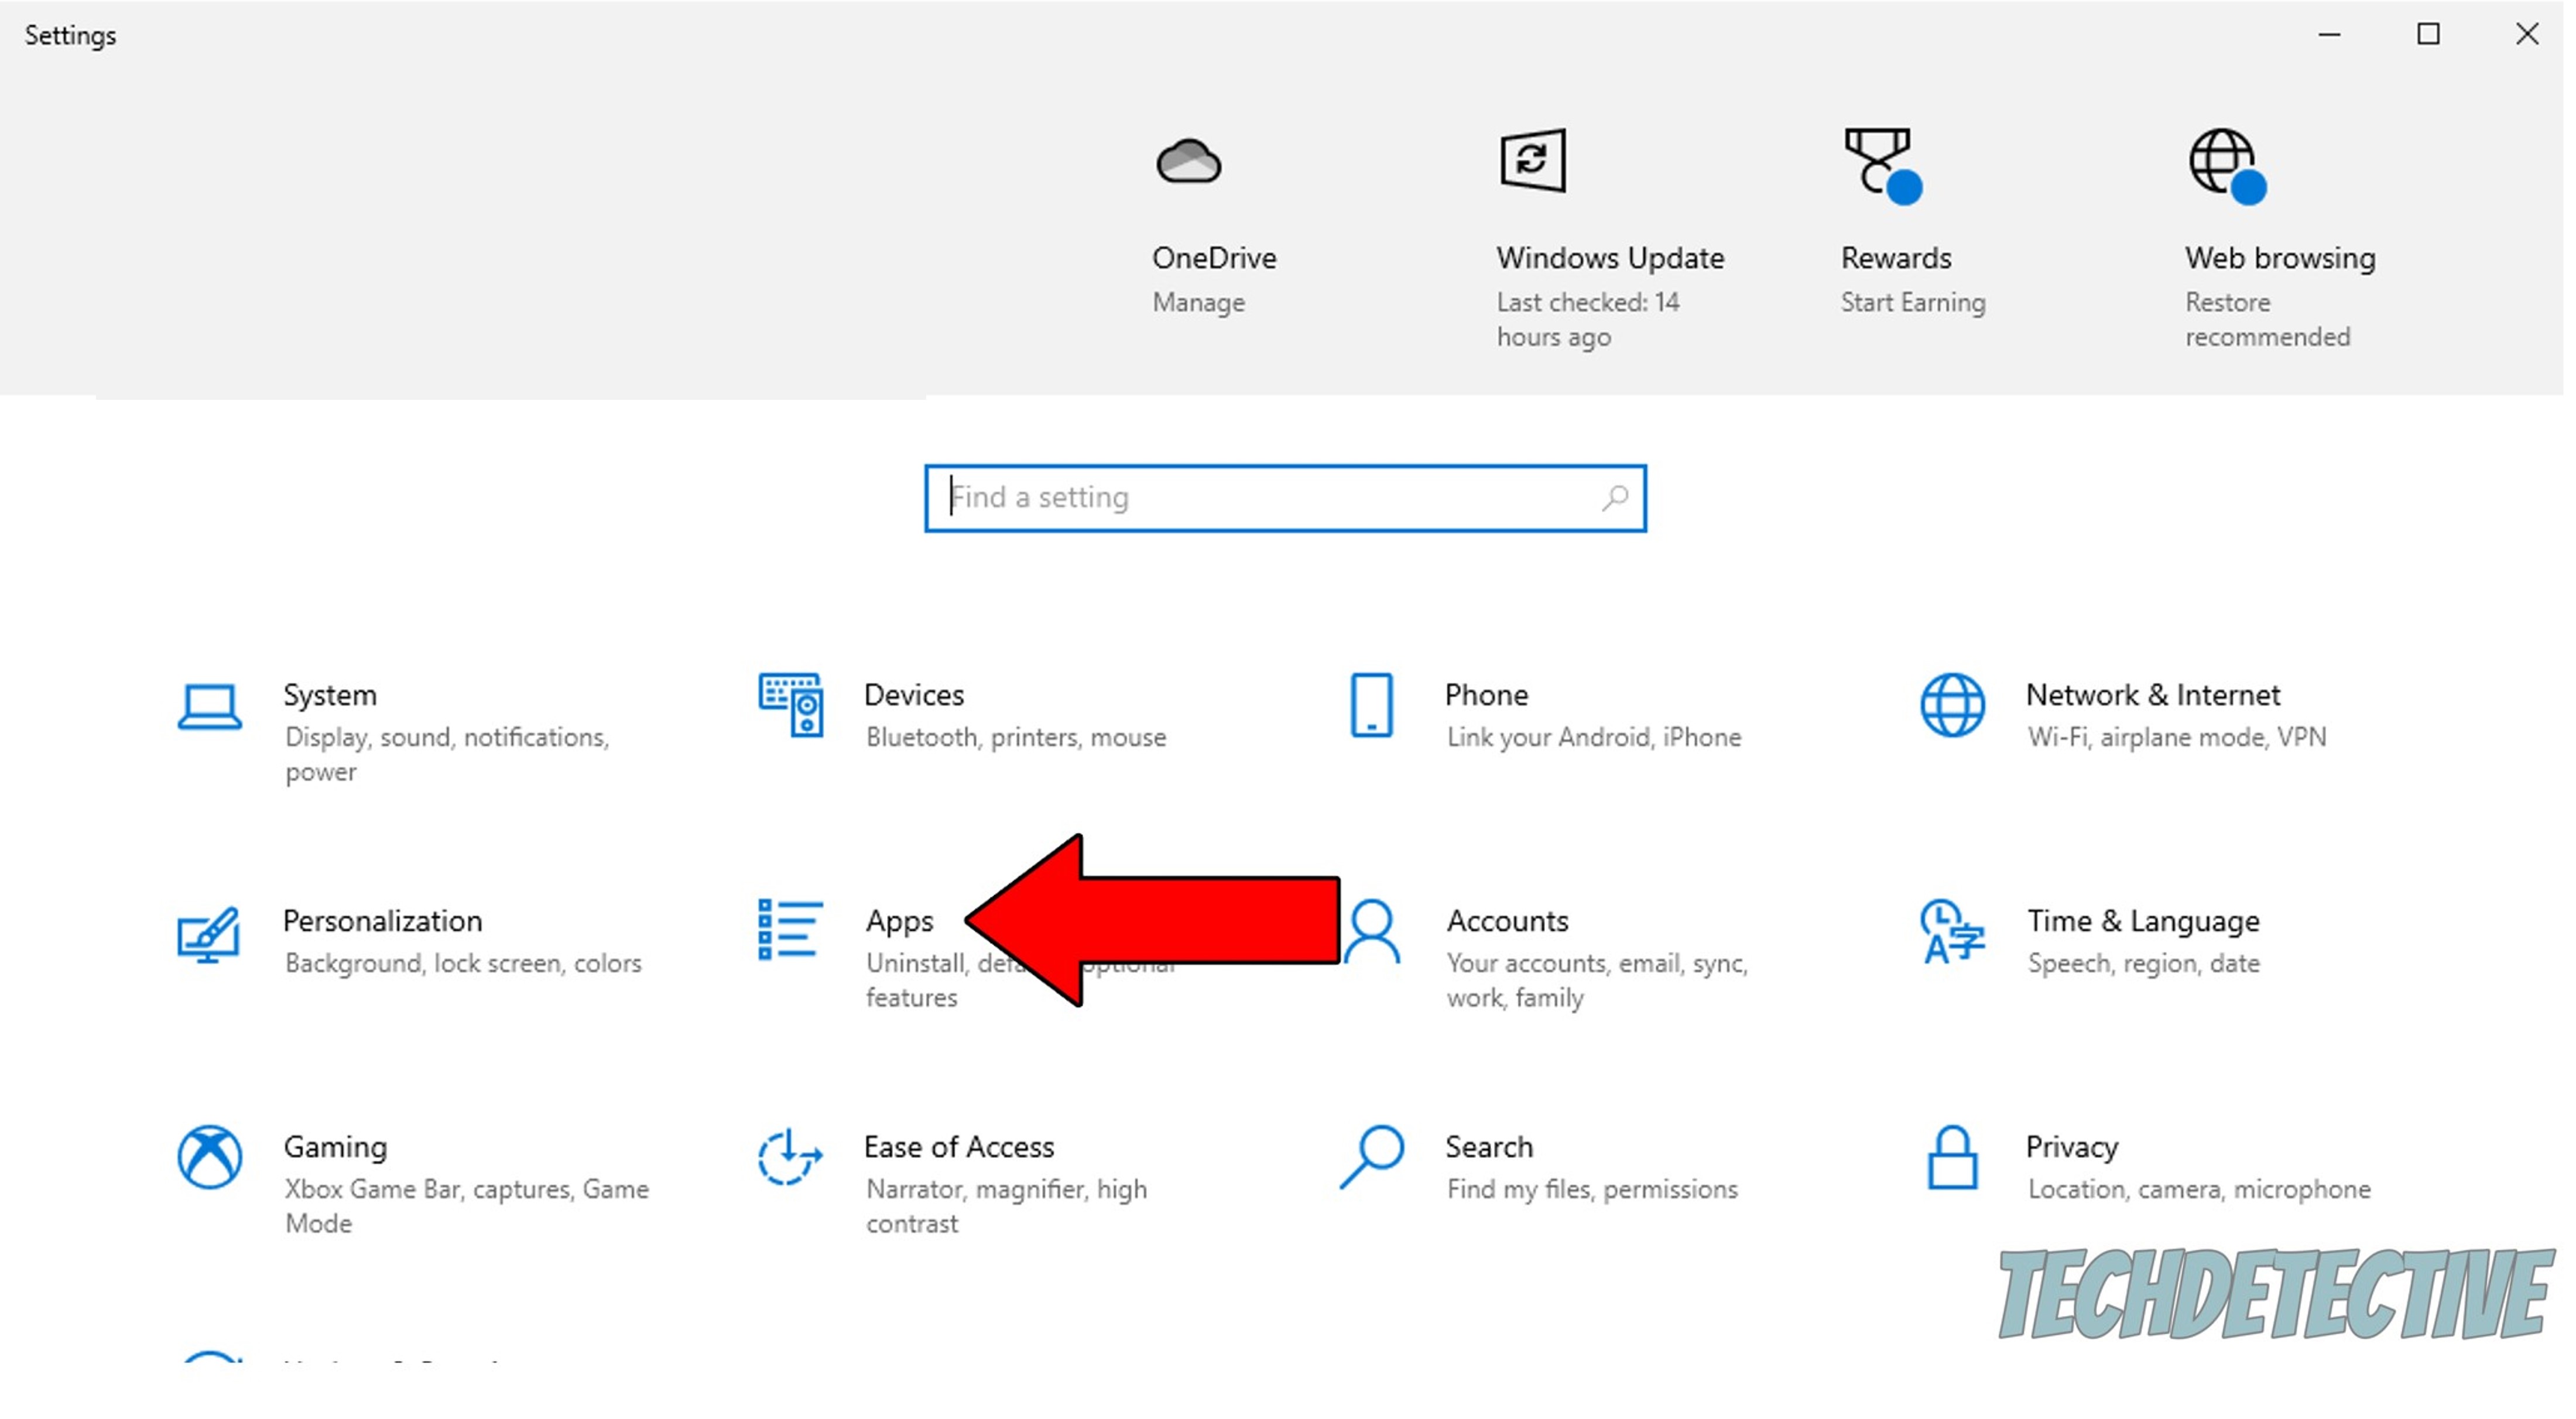 How to access app settings on Windows 10